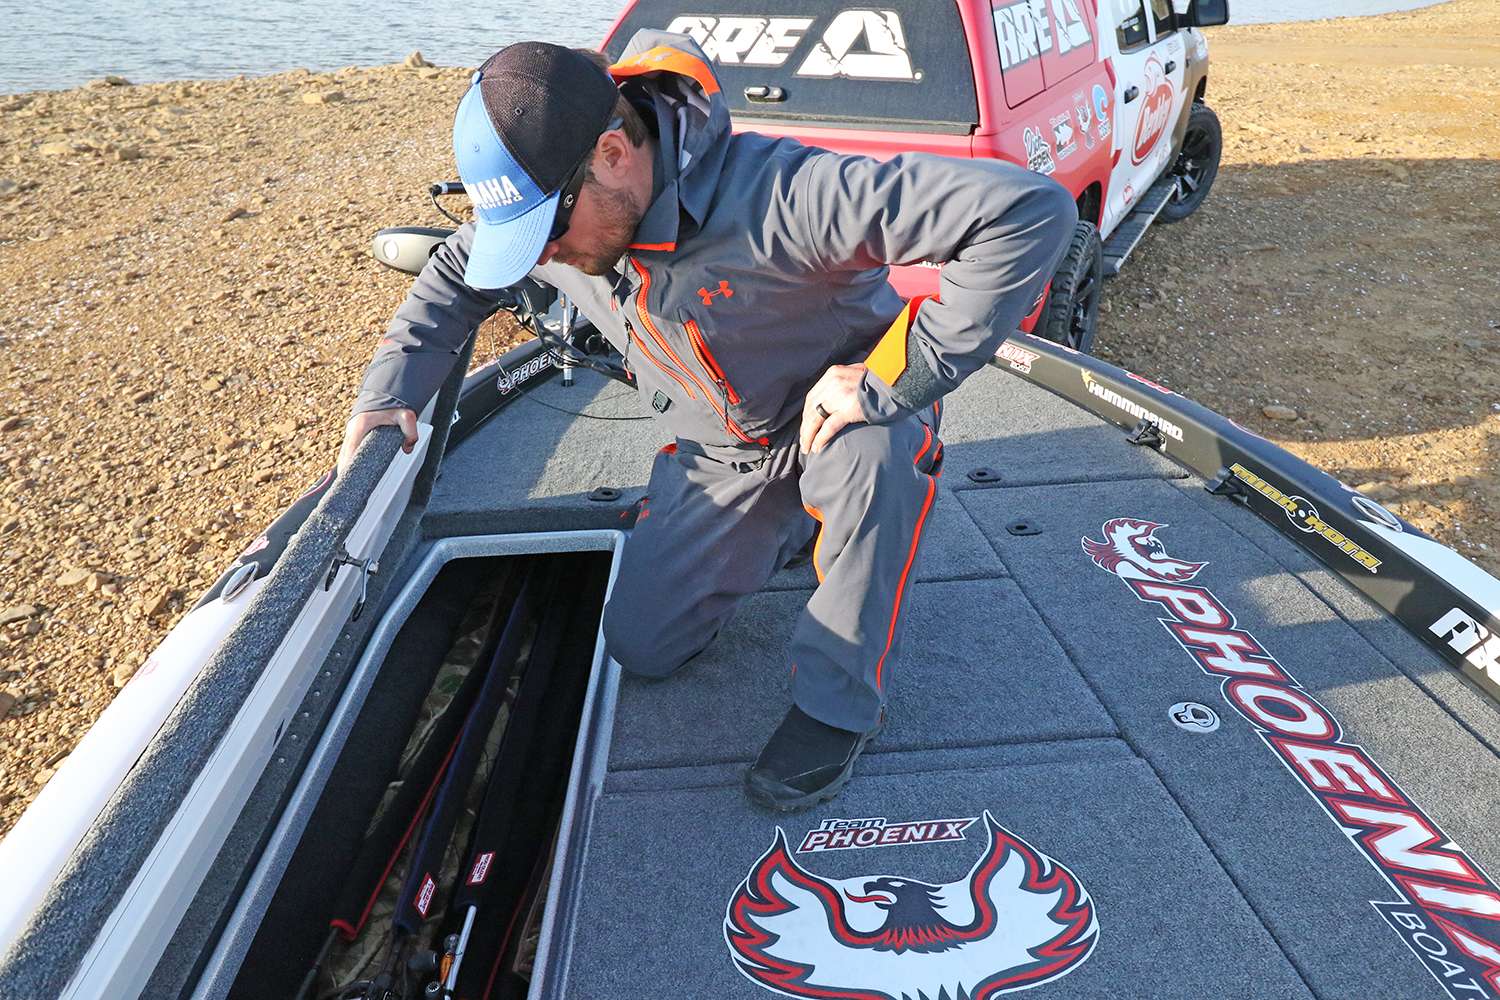 Digging into the first rod locker, Lucas looks for a couple of his favorite Abu Garcia sticks. 